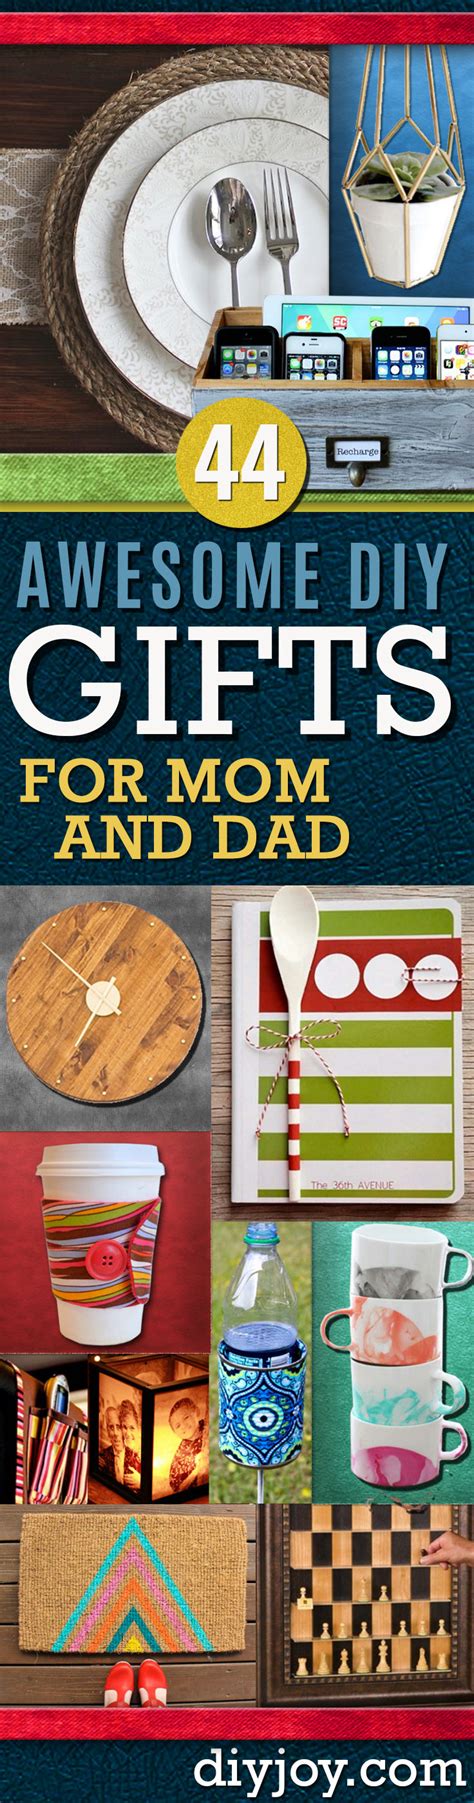 Good anniversary gifts for mom and dad. Awesome DIY Gift Ideas Mom and Dad Will Love